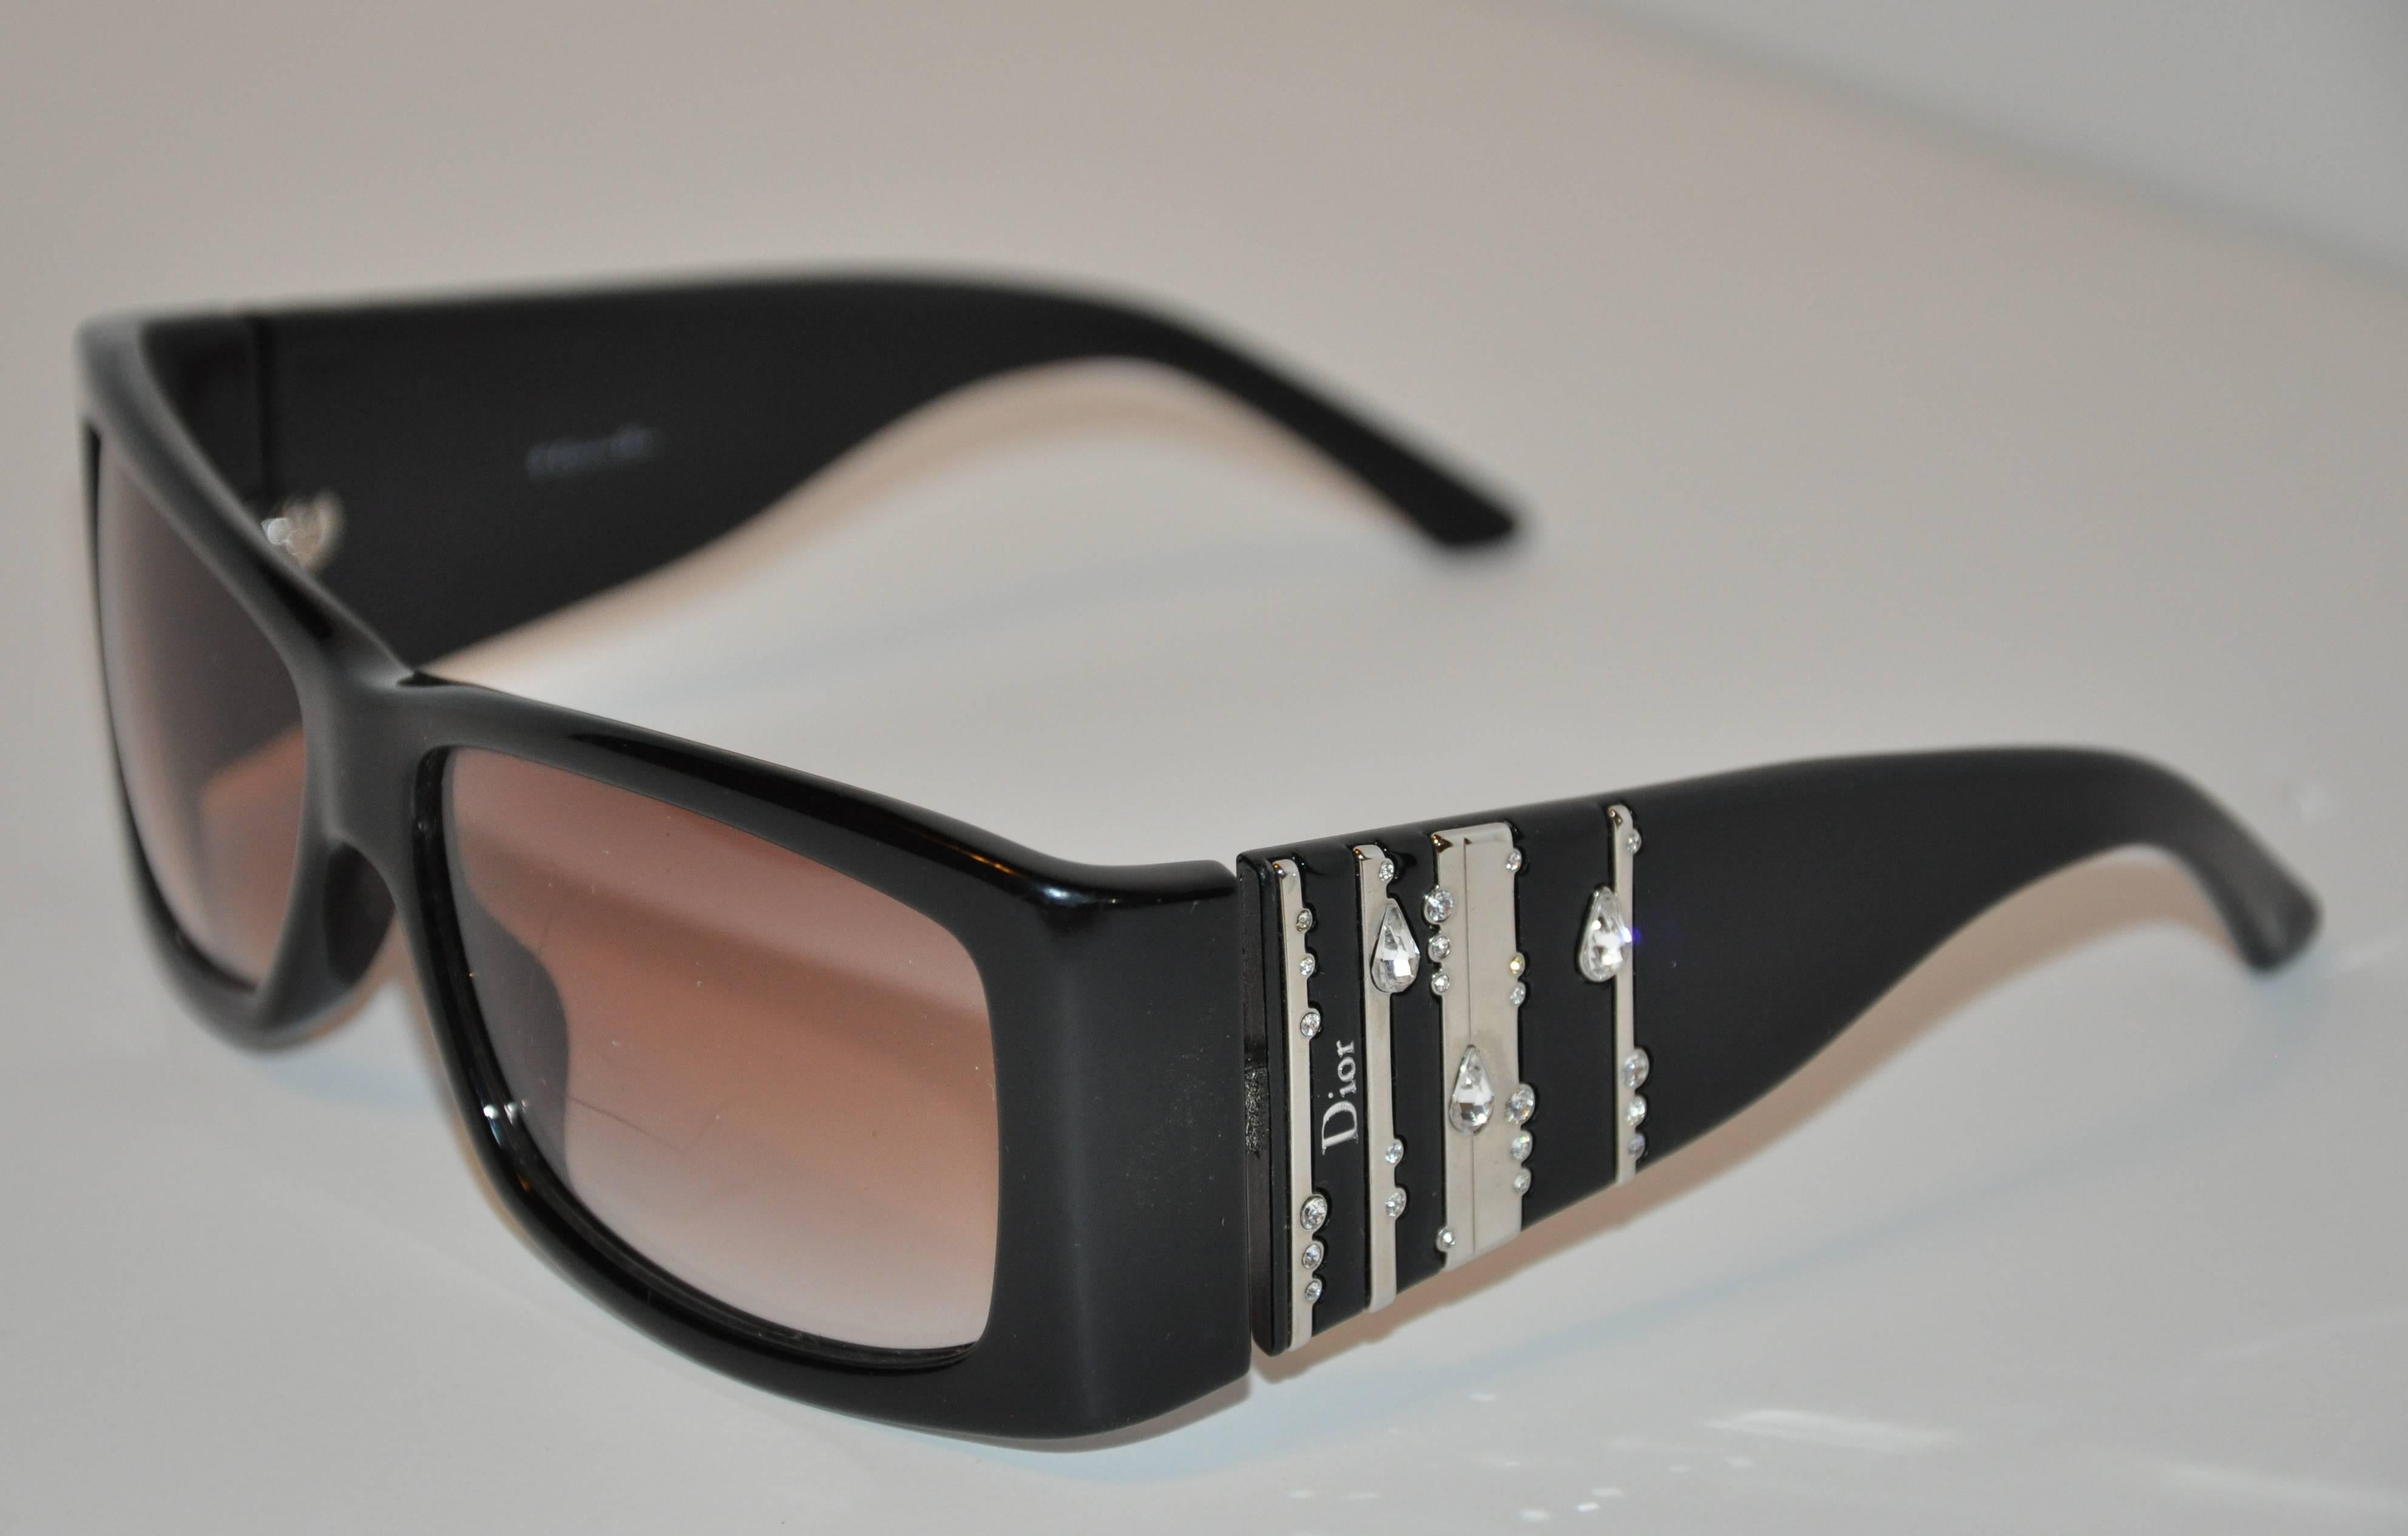        Christian Dior wonderfully detailed "Limited Edition" thick black lucite frames are highlighted with polished silver hardware combined with droplets of rhinestones on the arms. The length across the front measures 5 1/2",